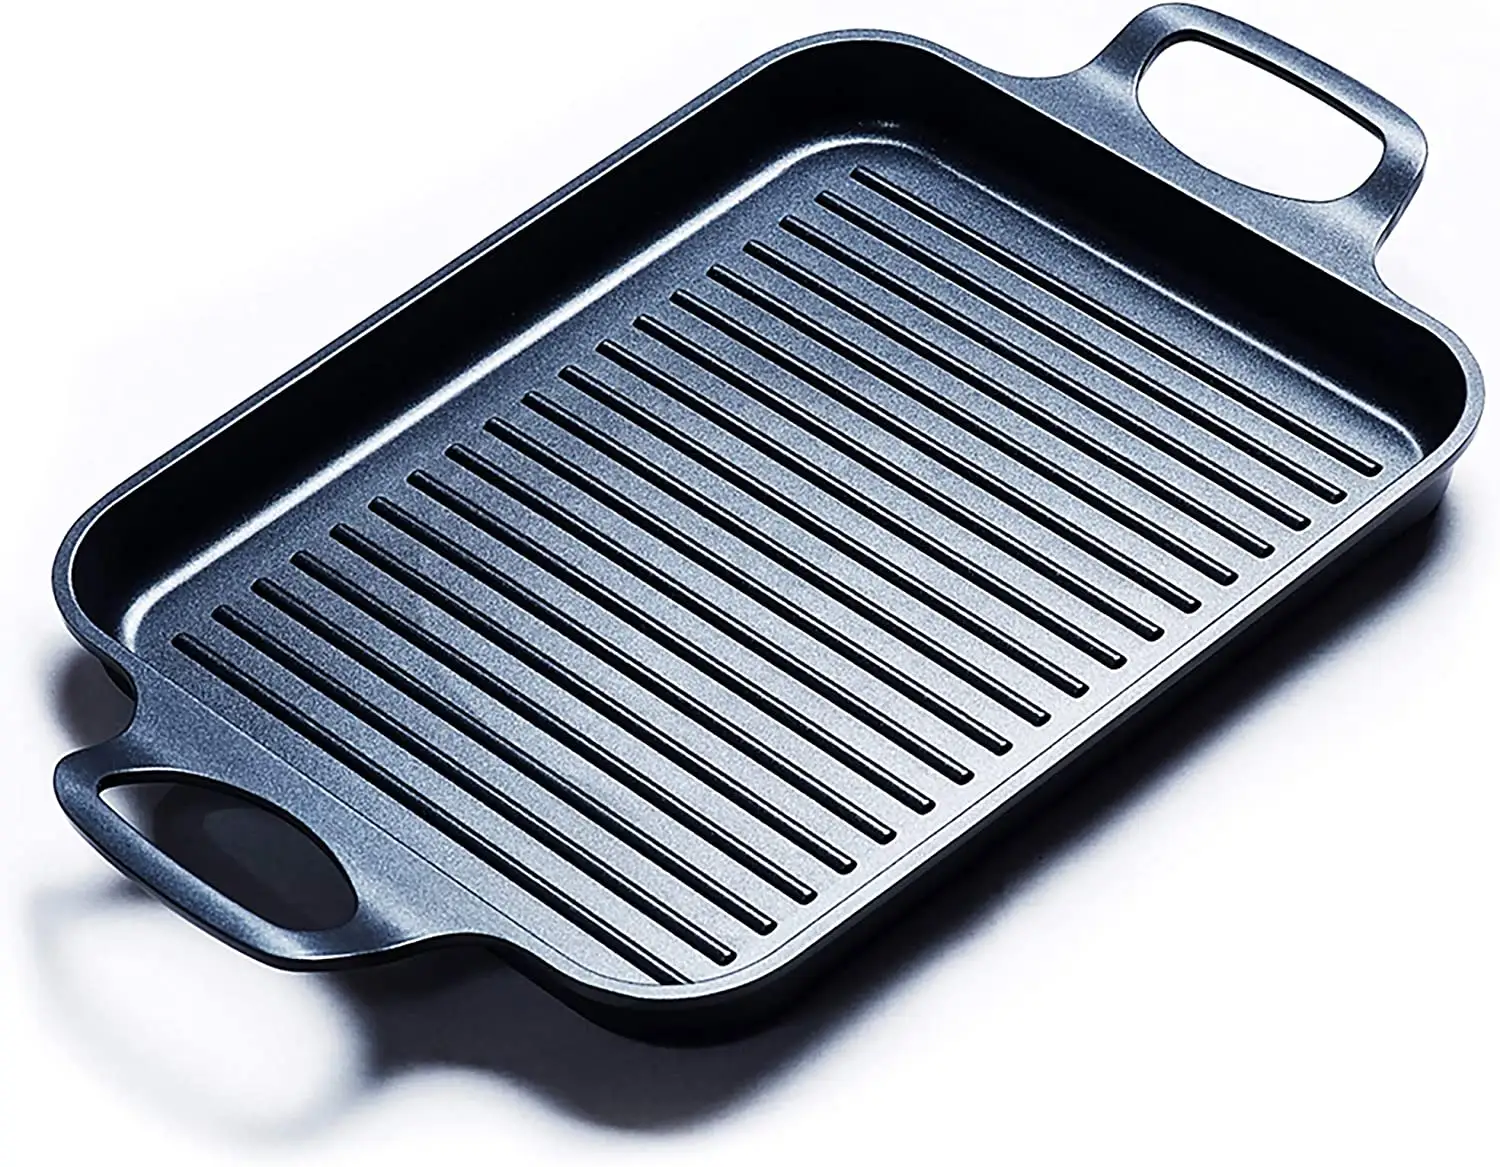 2023 Hot- selling die -cast aluminum Grill Plate korean grill plate bbq grill plate for outdoors with handle